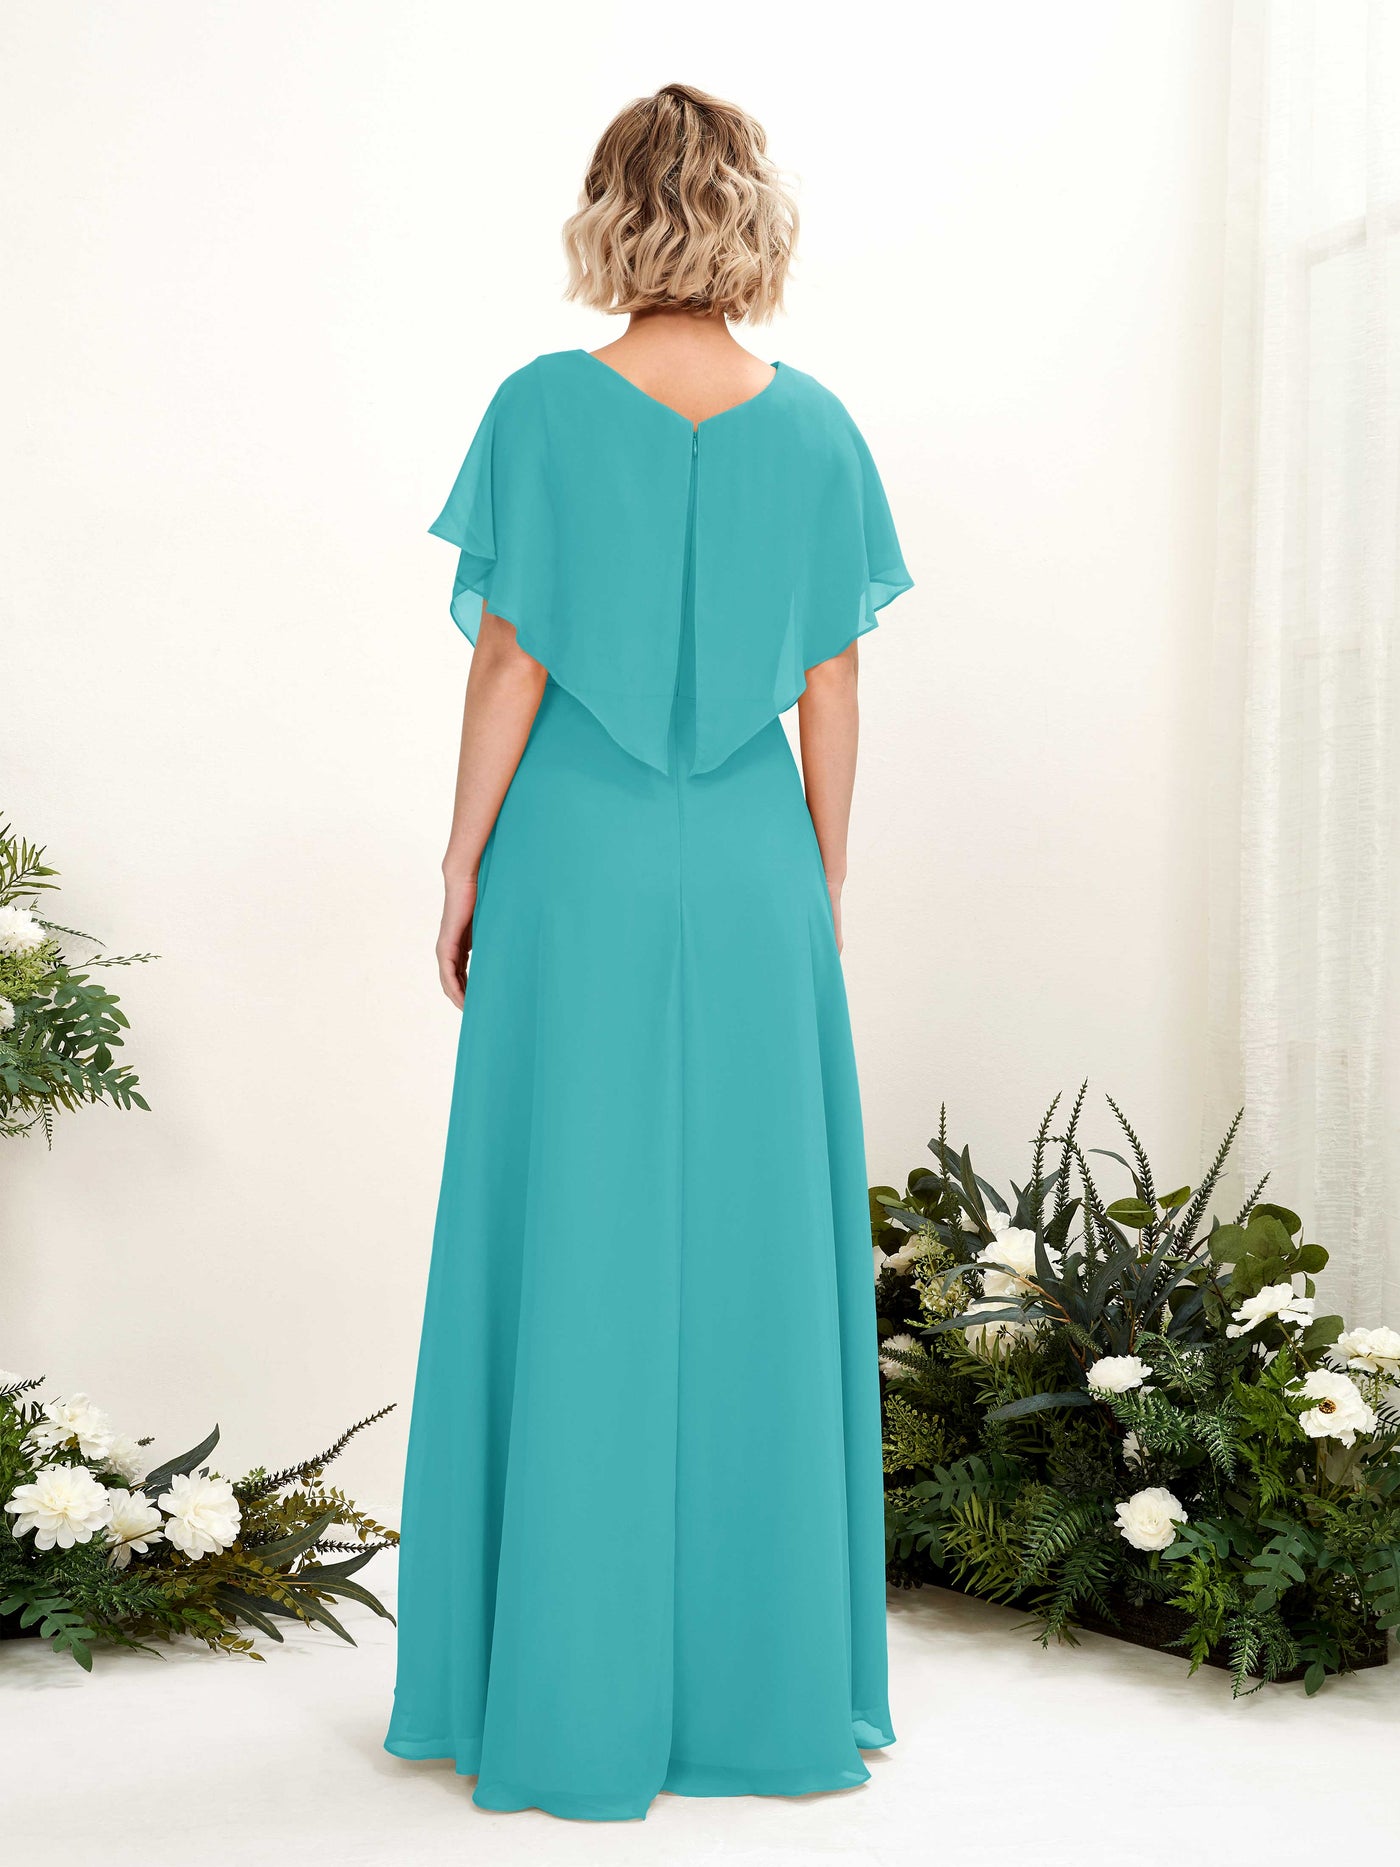 Turquoise Bridesmaid Dresses Bridesmaid Dress A-line Chiffon V-neck Full Length Short Sleeves Wedding Party Dress (81222123)#color_turquoise